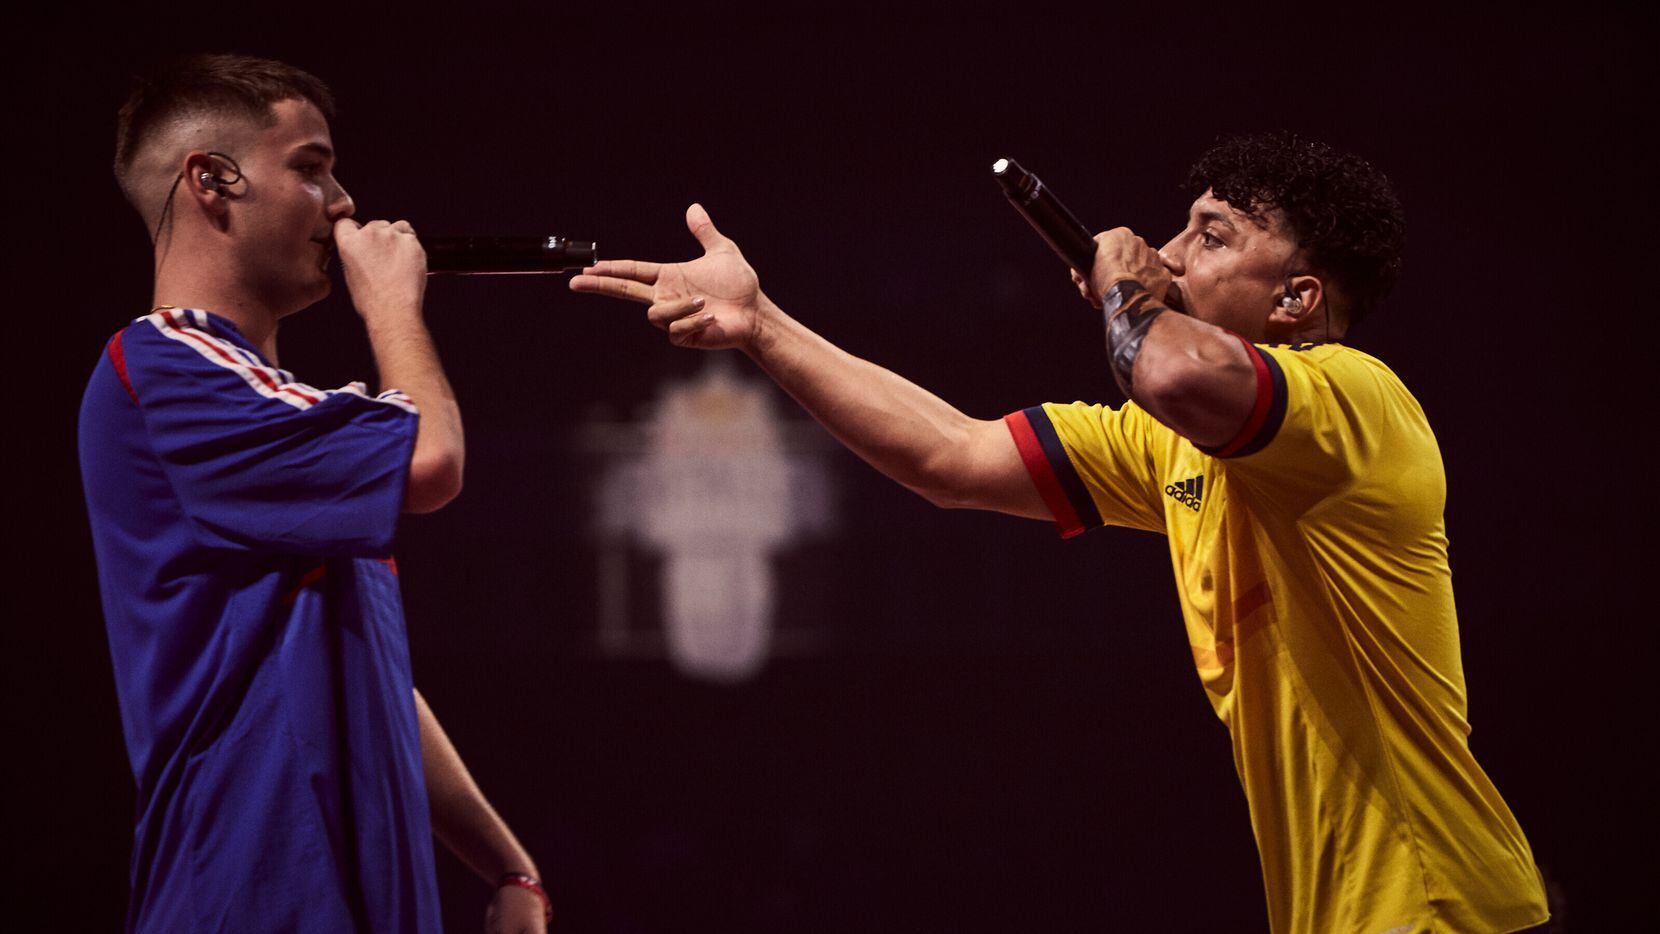 Valles-T and Bnet compete in the Red Bull Batalla freestyle rap competition in 2021.